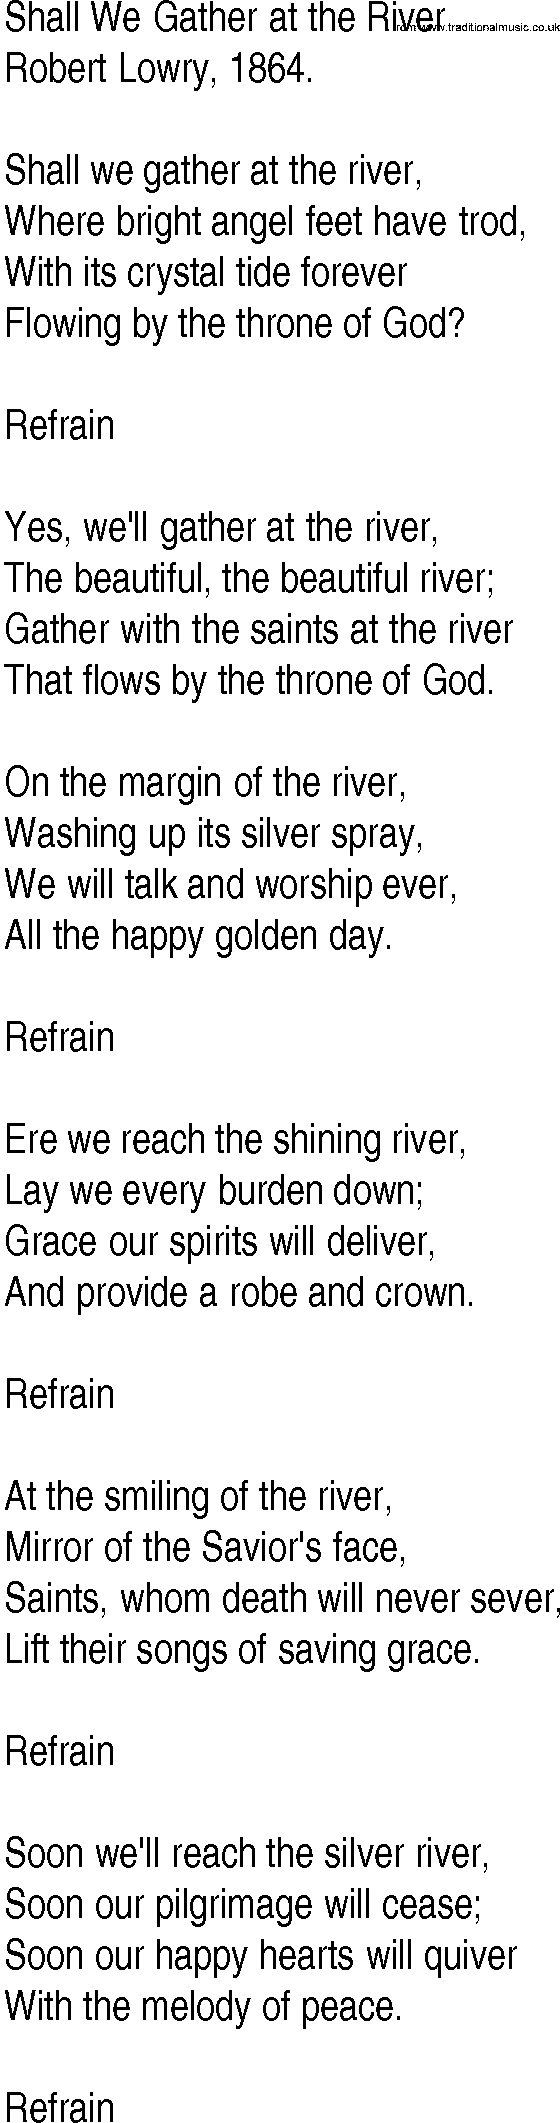 Hymn and Gospel Song: Shall We Gather at the River by Robert Lowry lyrics